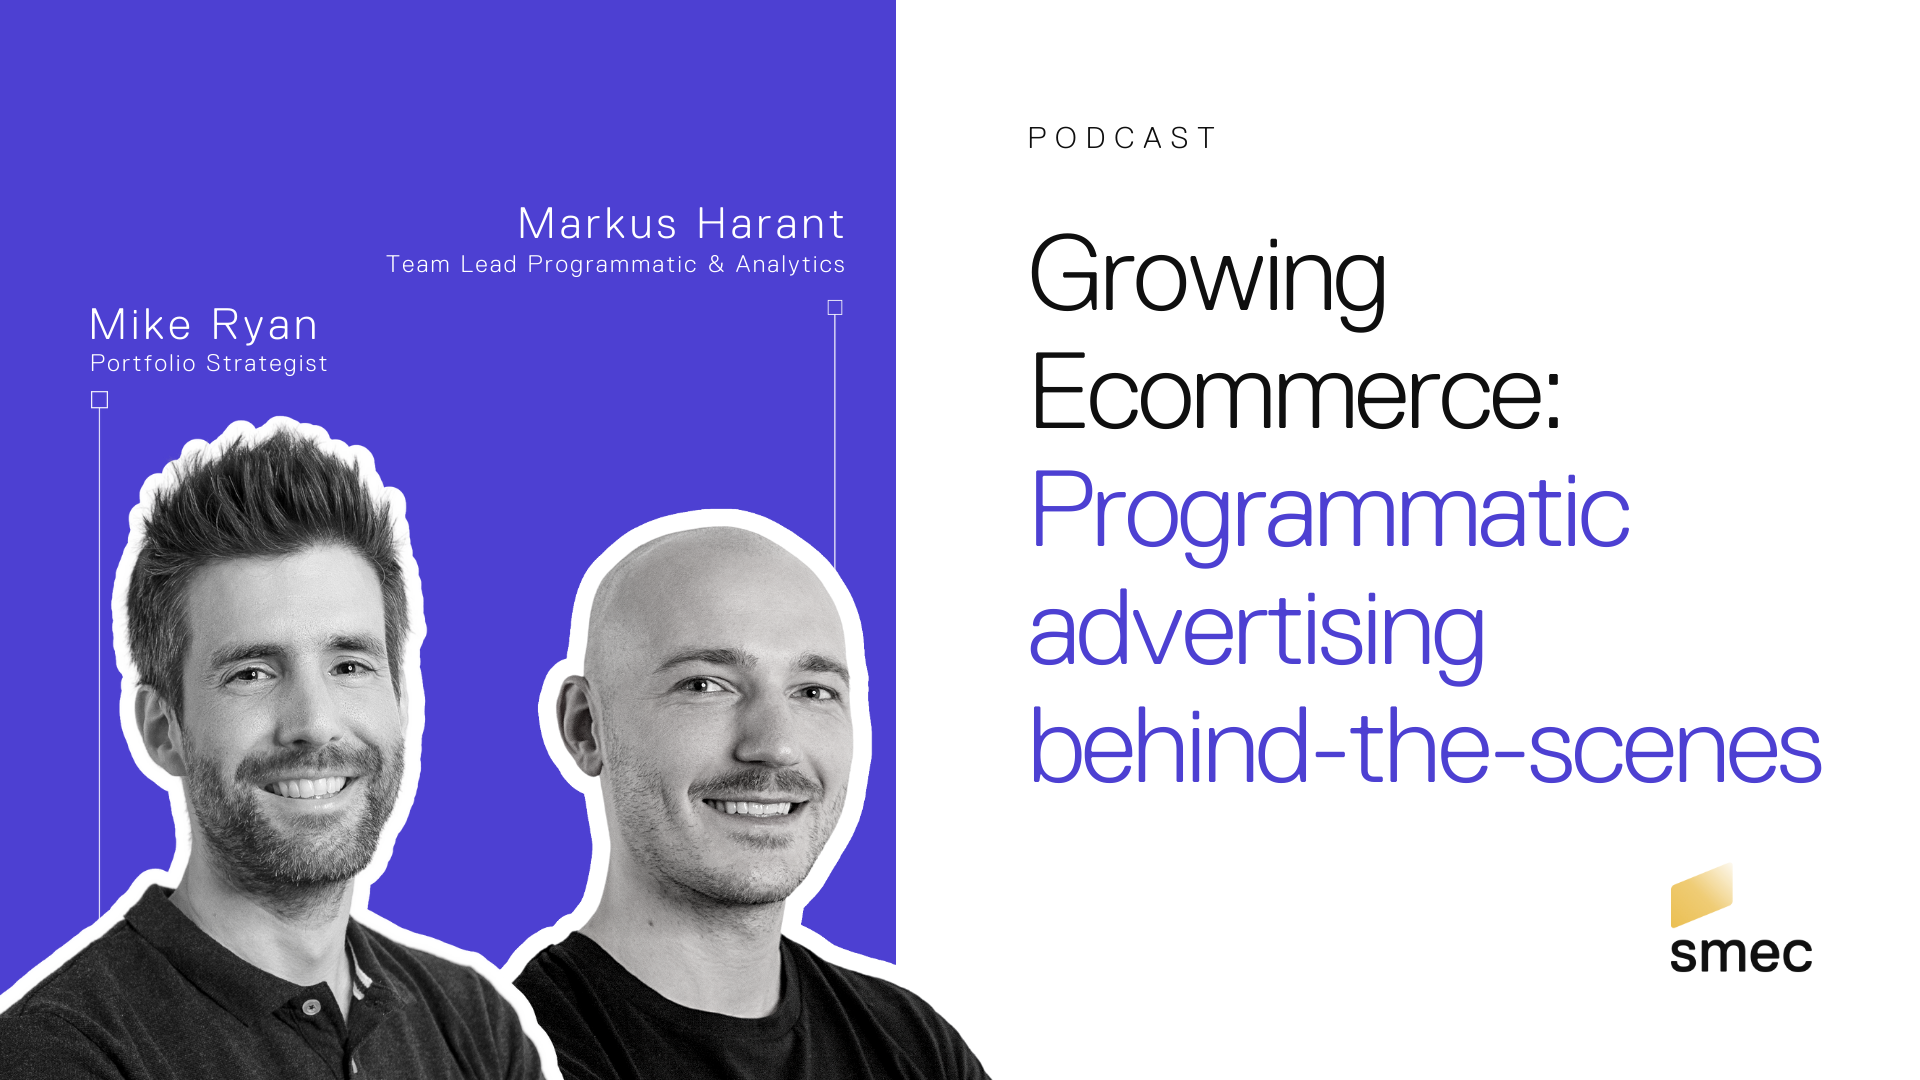 Banner for Growing Ecommerce podcast episode Programmatic advertising behind the scenes